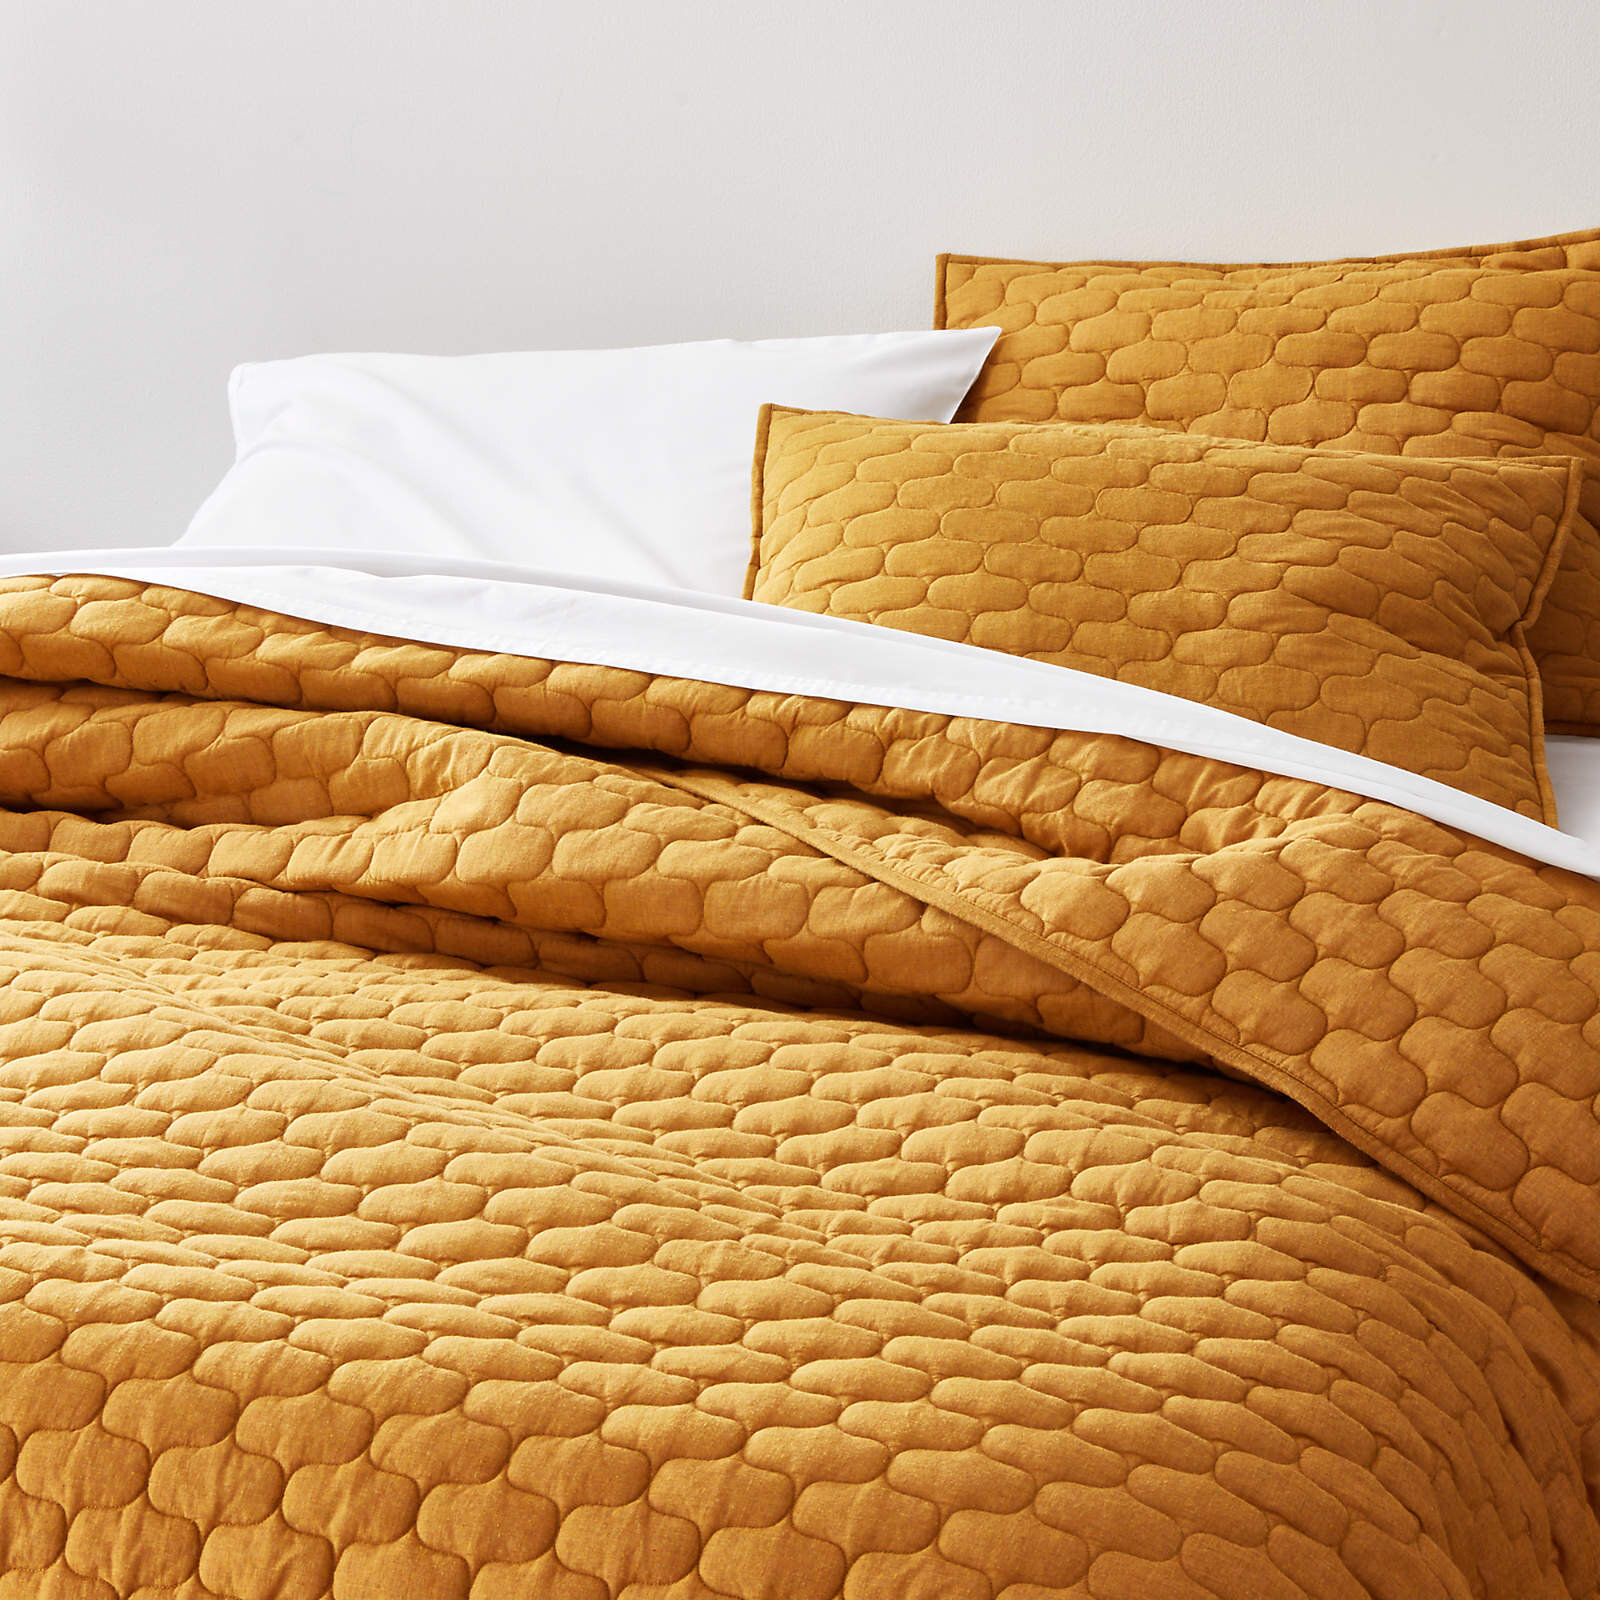 fontaine-mustard-yellow-cotton-quilts-and-pillow-shams.jpg